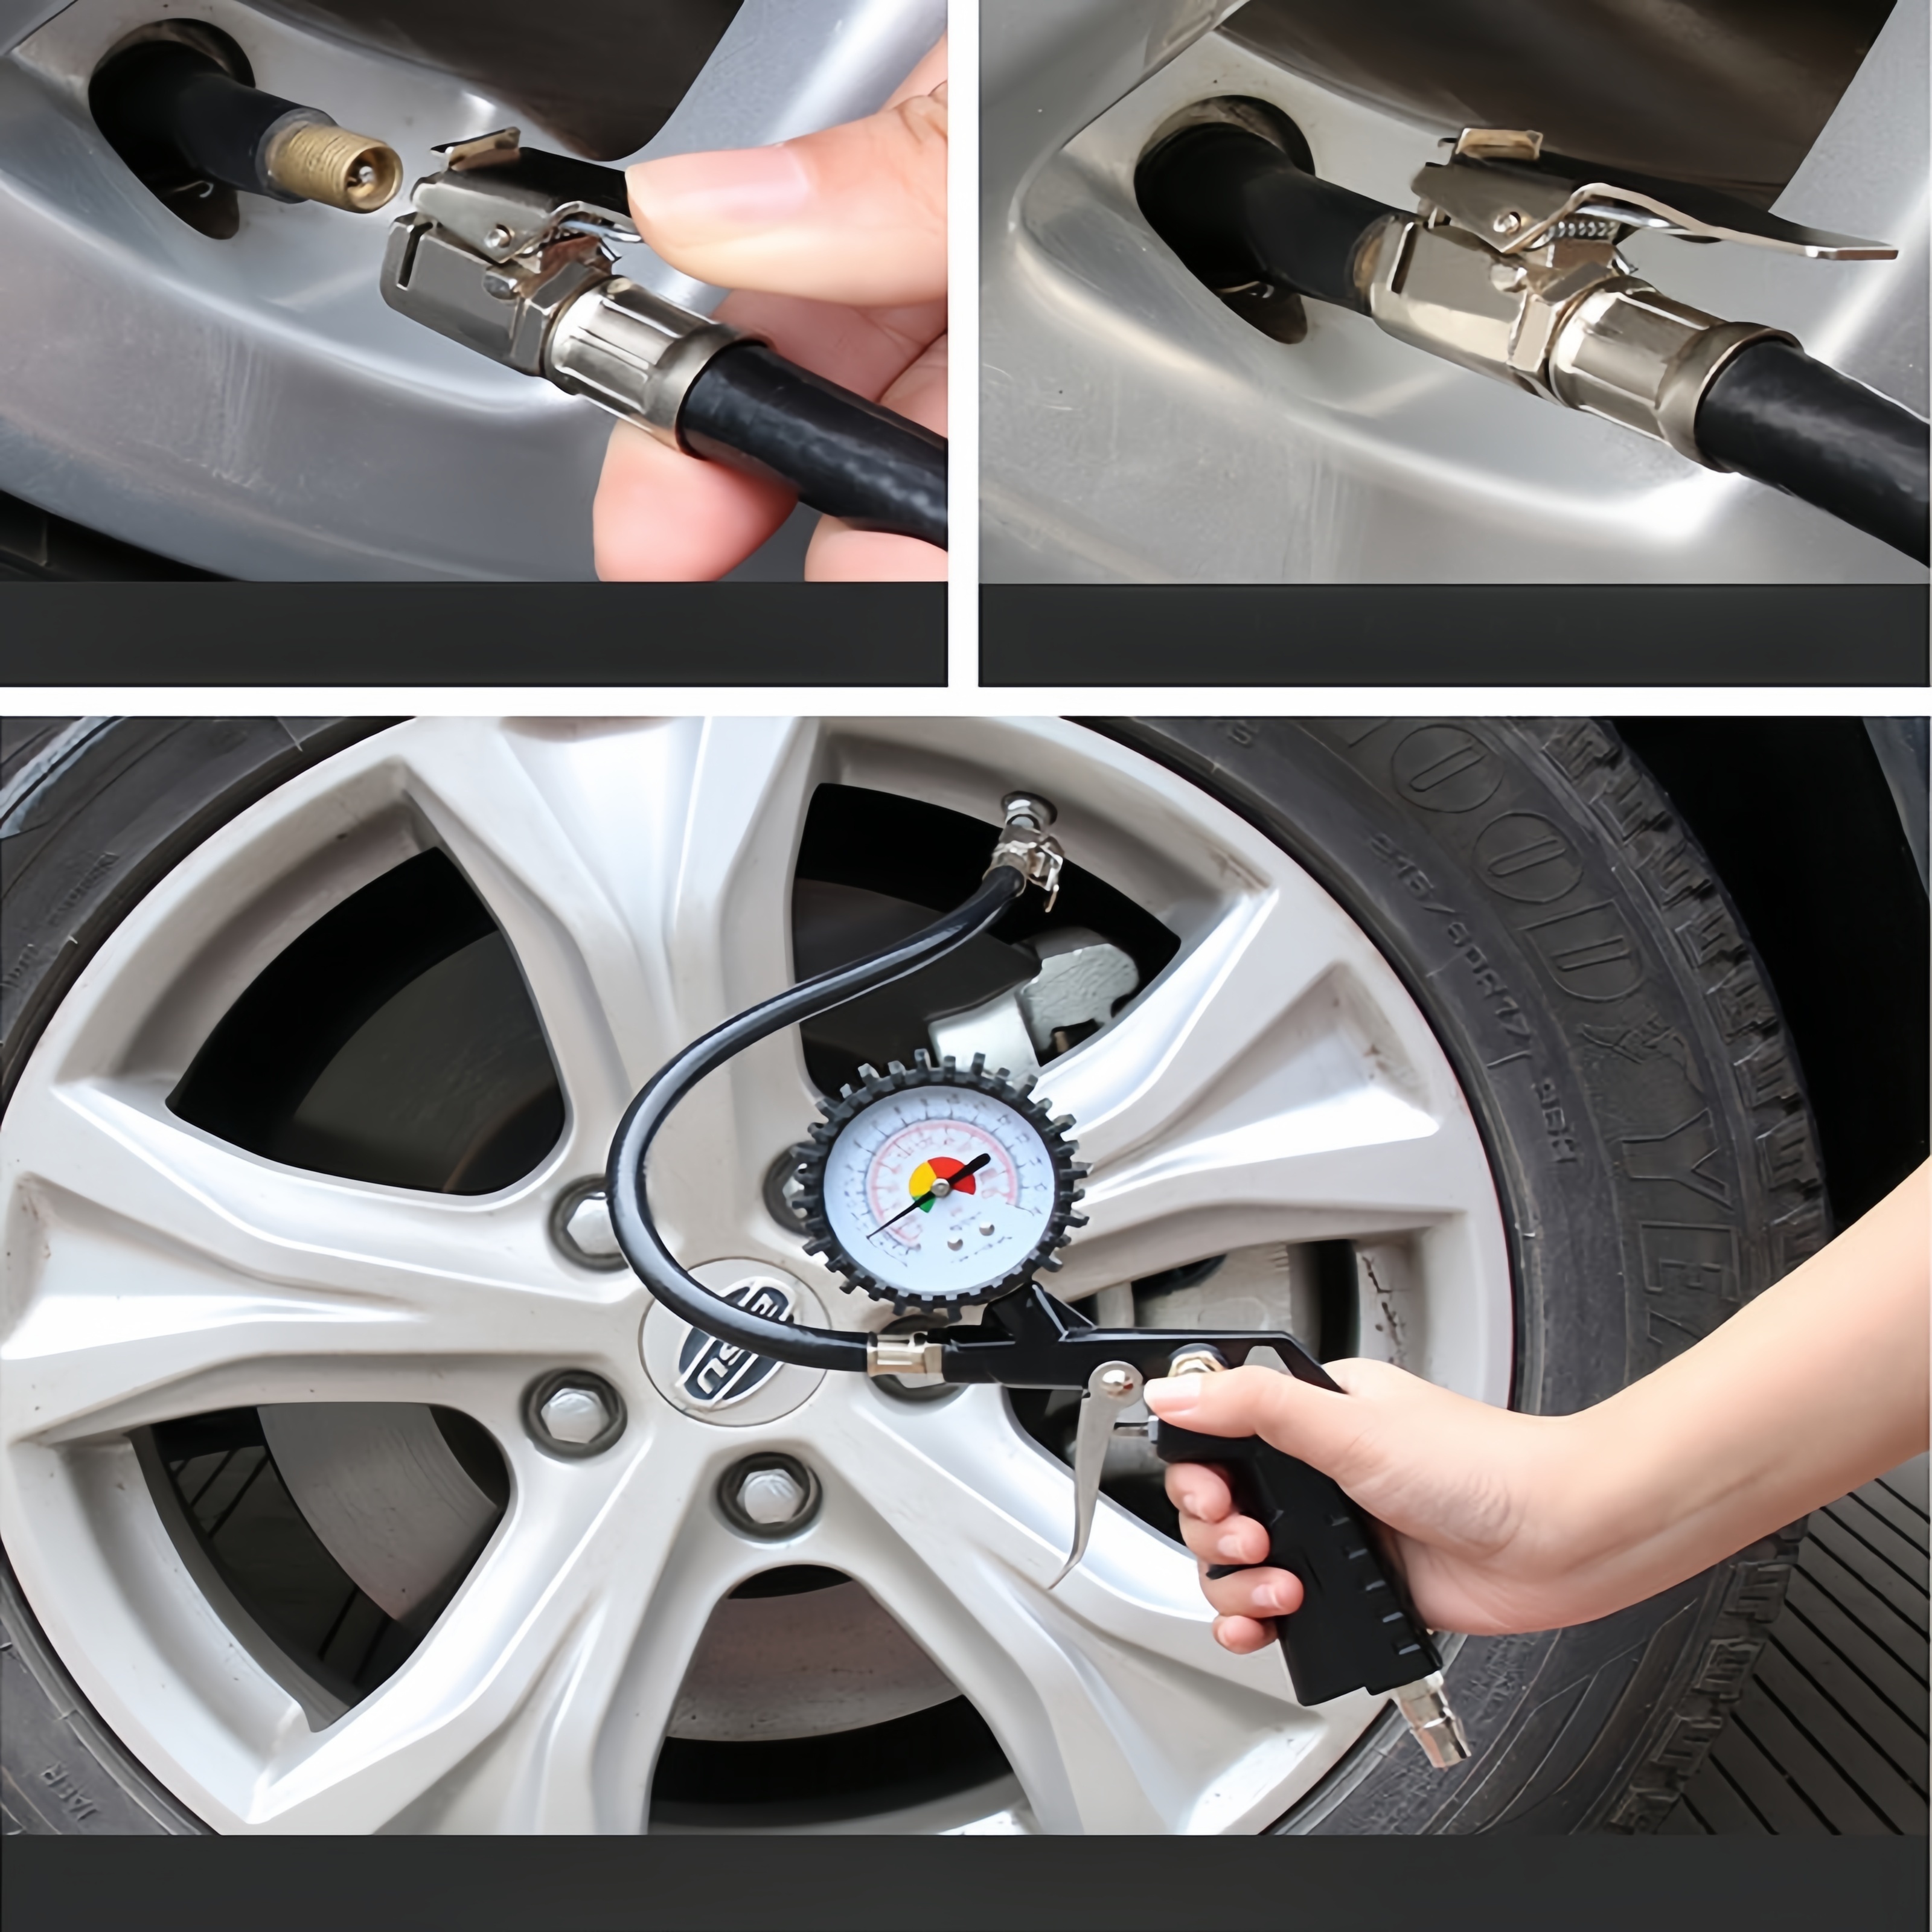 

Universal Model Tire Pressure Gauge Inflator With Pressure Gauge, Pistol Grip Air Compressor Tool For Car And Motorcycle Maintenance, Multifunctional 3-in-1 Tire Inflation And Deflation Tool